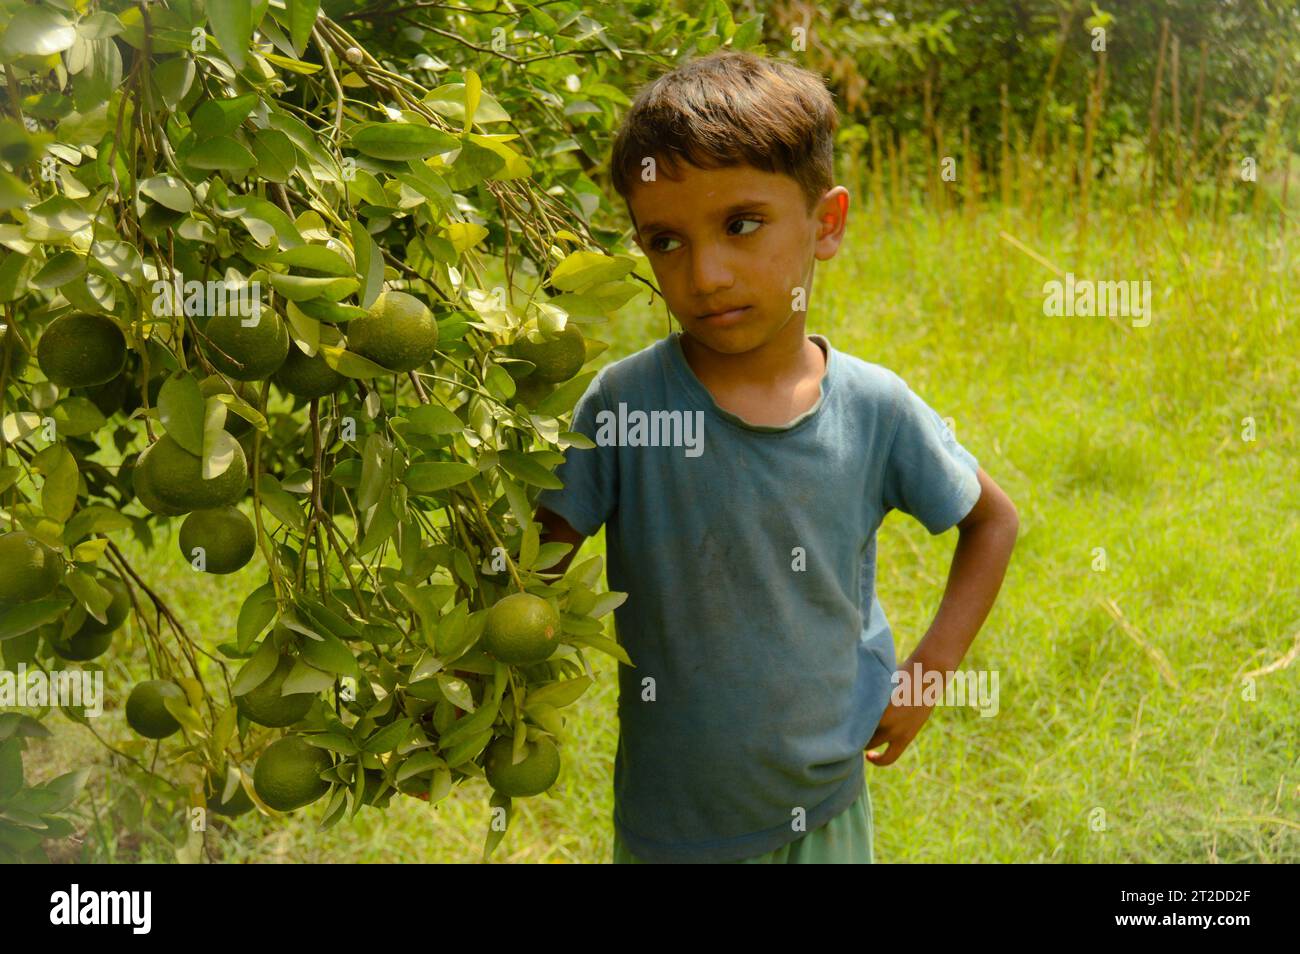 A young boy holding branch of unriped Oranges. Hanging branch of orange on hand. Orange Fruit isolated on hand. Orange. Citrus fruit. Oranges. Stock Photo